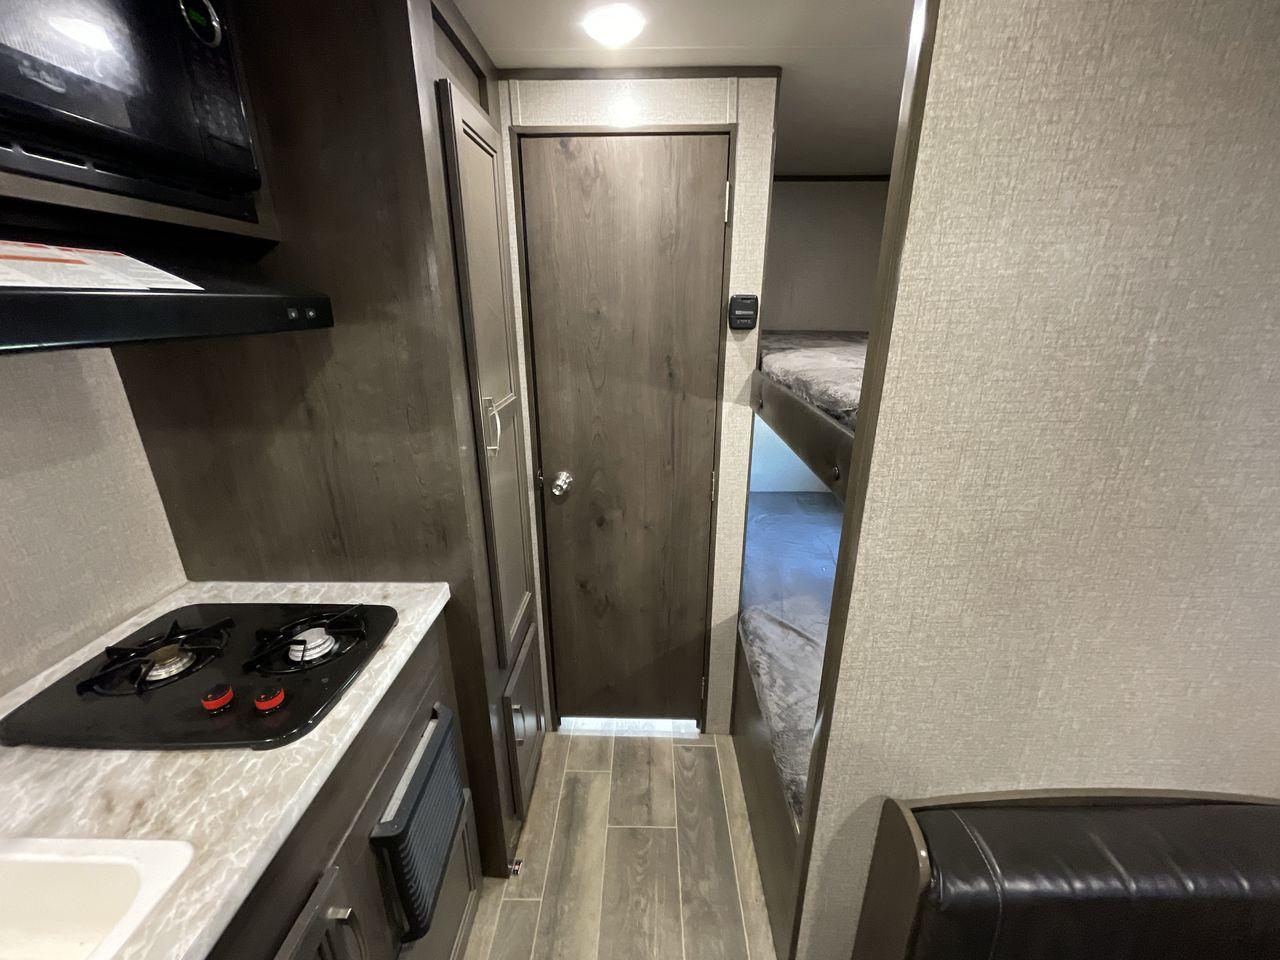 2021 JAYCO JAY FLIGHT SLX 174BH (1UJBJ0AJ1M1) , Length: 21.67 ft | Dry Weight: 3,075 lbs | GVWR: 3,950 lbs | Slides: 0 transmission, located at 4319 N Main St, Cleburne, TX, 76033, (817) 678-5133, 32.385960, -97.391212 - Take the 2021 Jayco Jay Flight SLX 174BH travel trailer out on your camping adventures. This lightweight and small RV is ideal for people looking for an affordable and cozy way to enjoy the great outdoors. The dimensions of this unit are 21.67 ft in length, 7.08 ft in width, and 9.17 ft in height. I - Photo #14